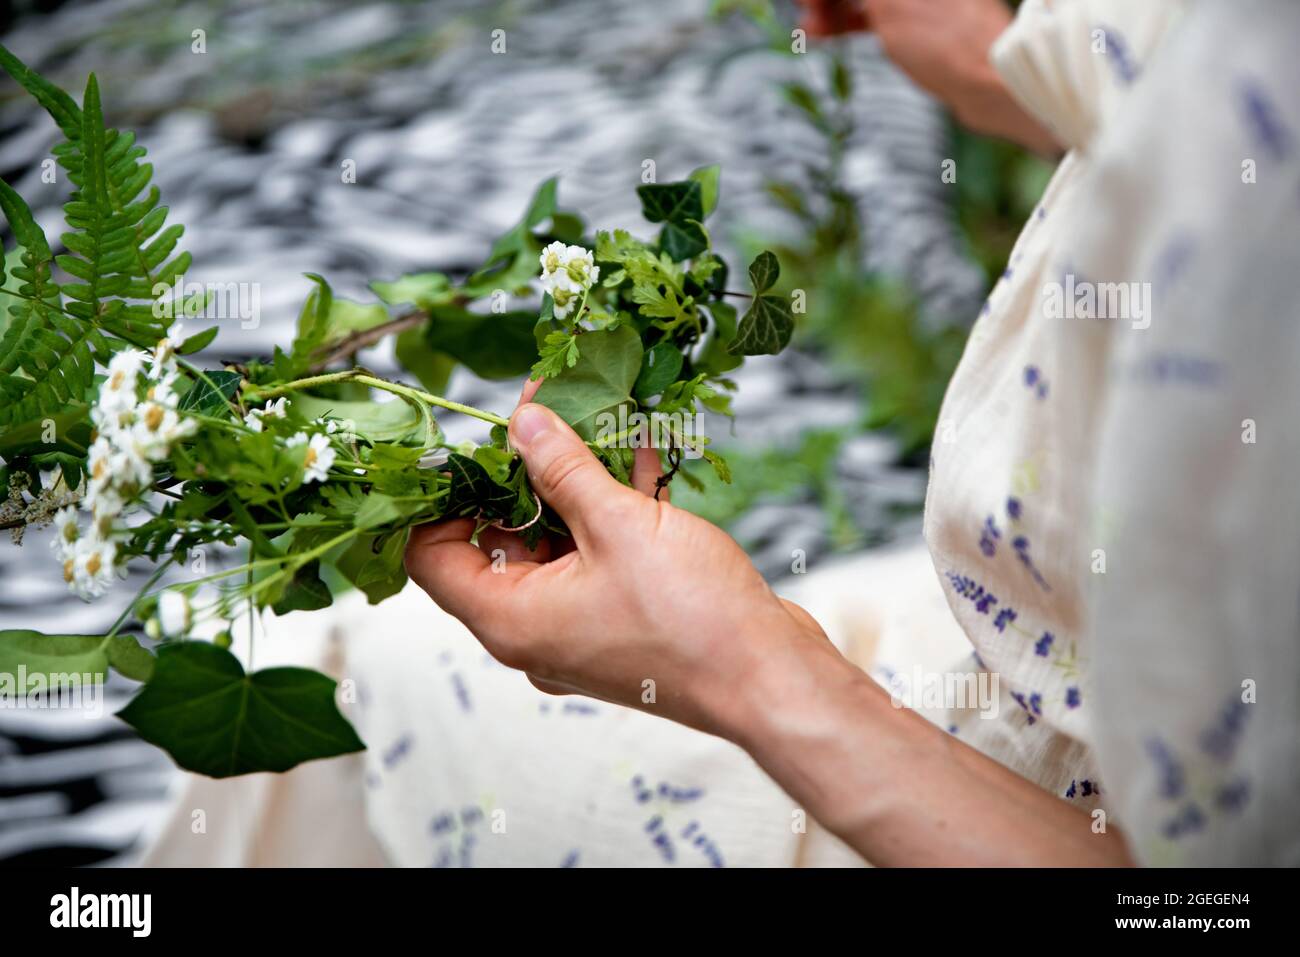 Woman making head wreath with fresh flowers. Close up of hands weaving a wreath with green leaves and flowers on midsummer day Stock Photo